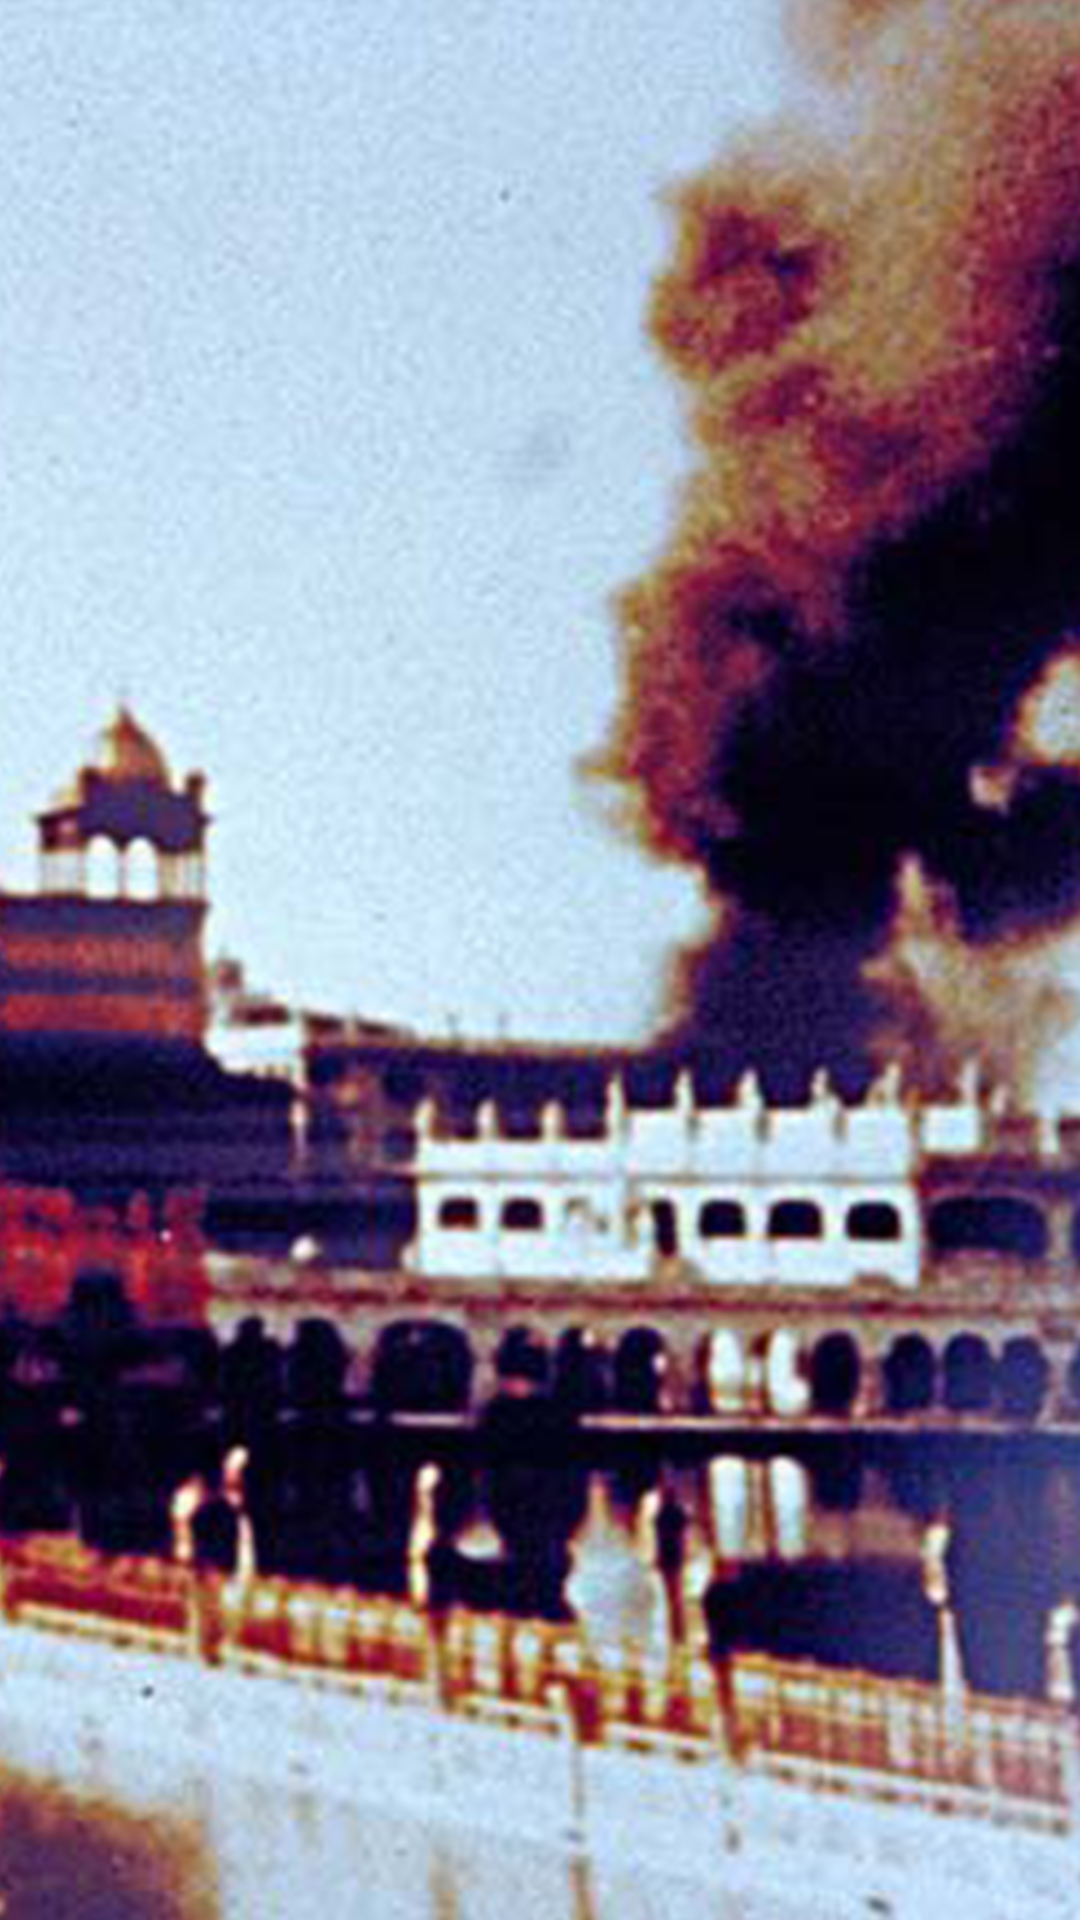 Operation Blue Star anniversary: Things you need to know about operation that led to 1984 Sikh riots